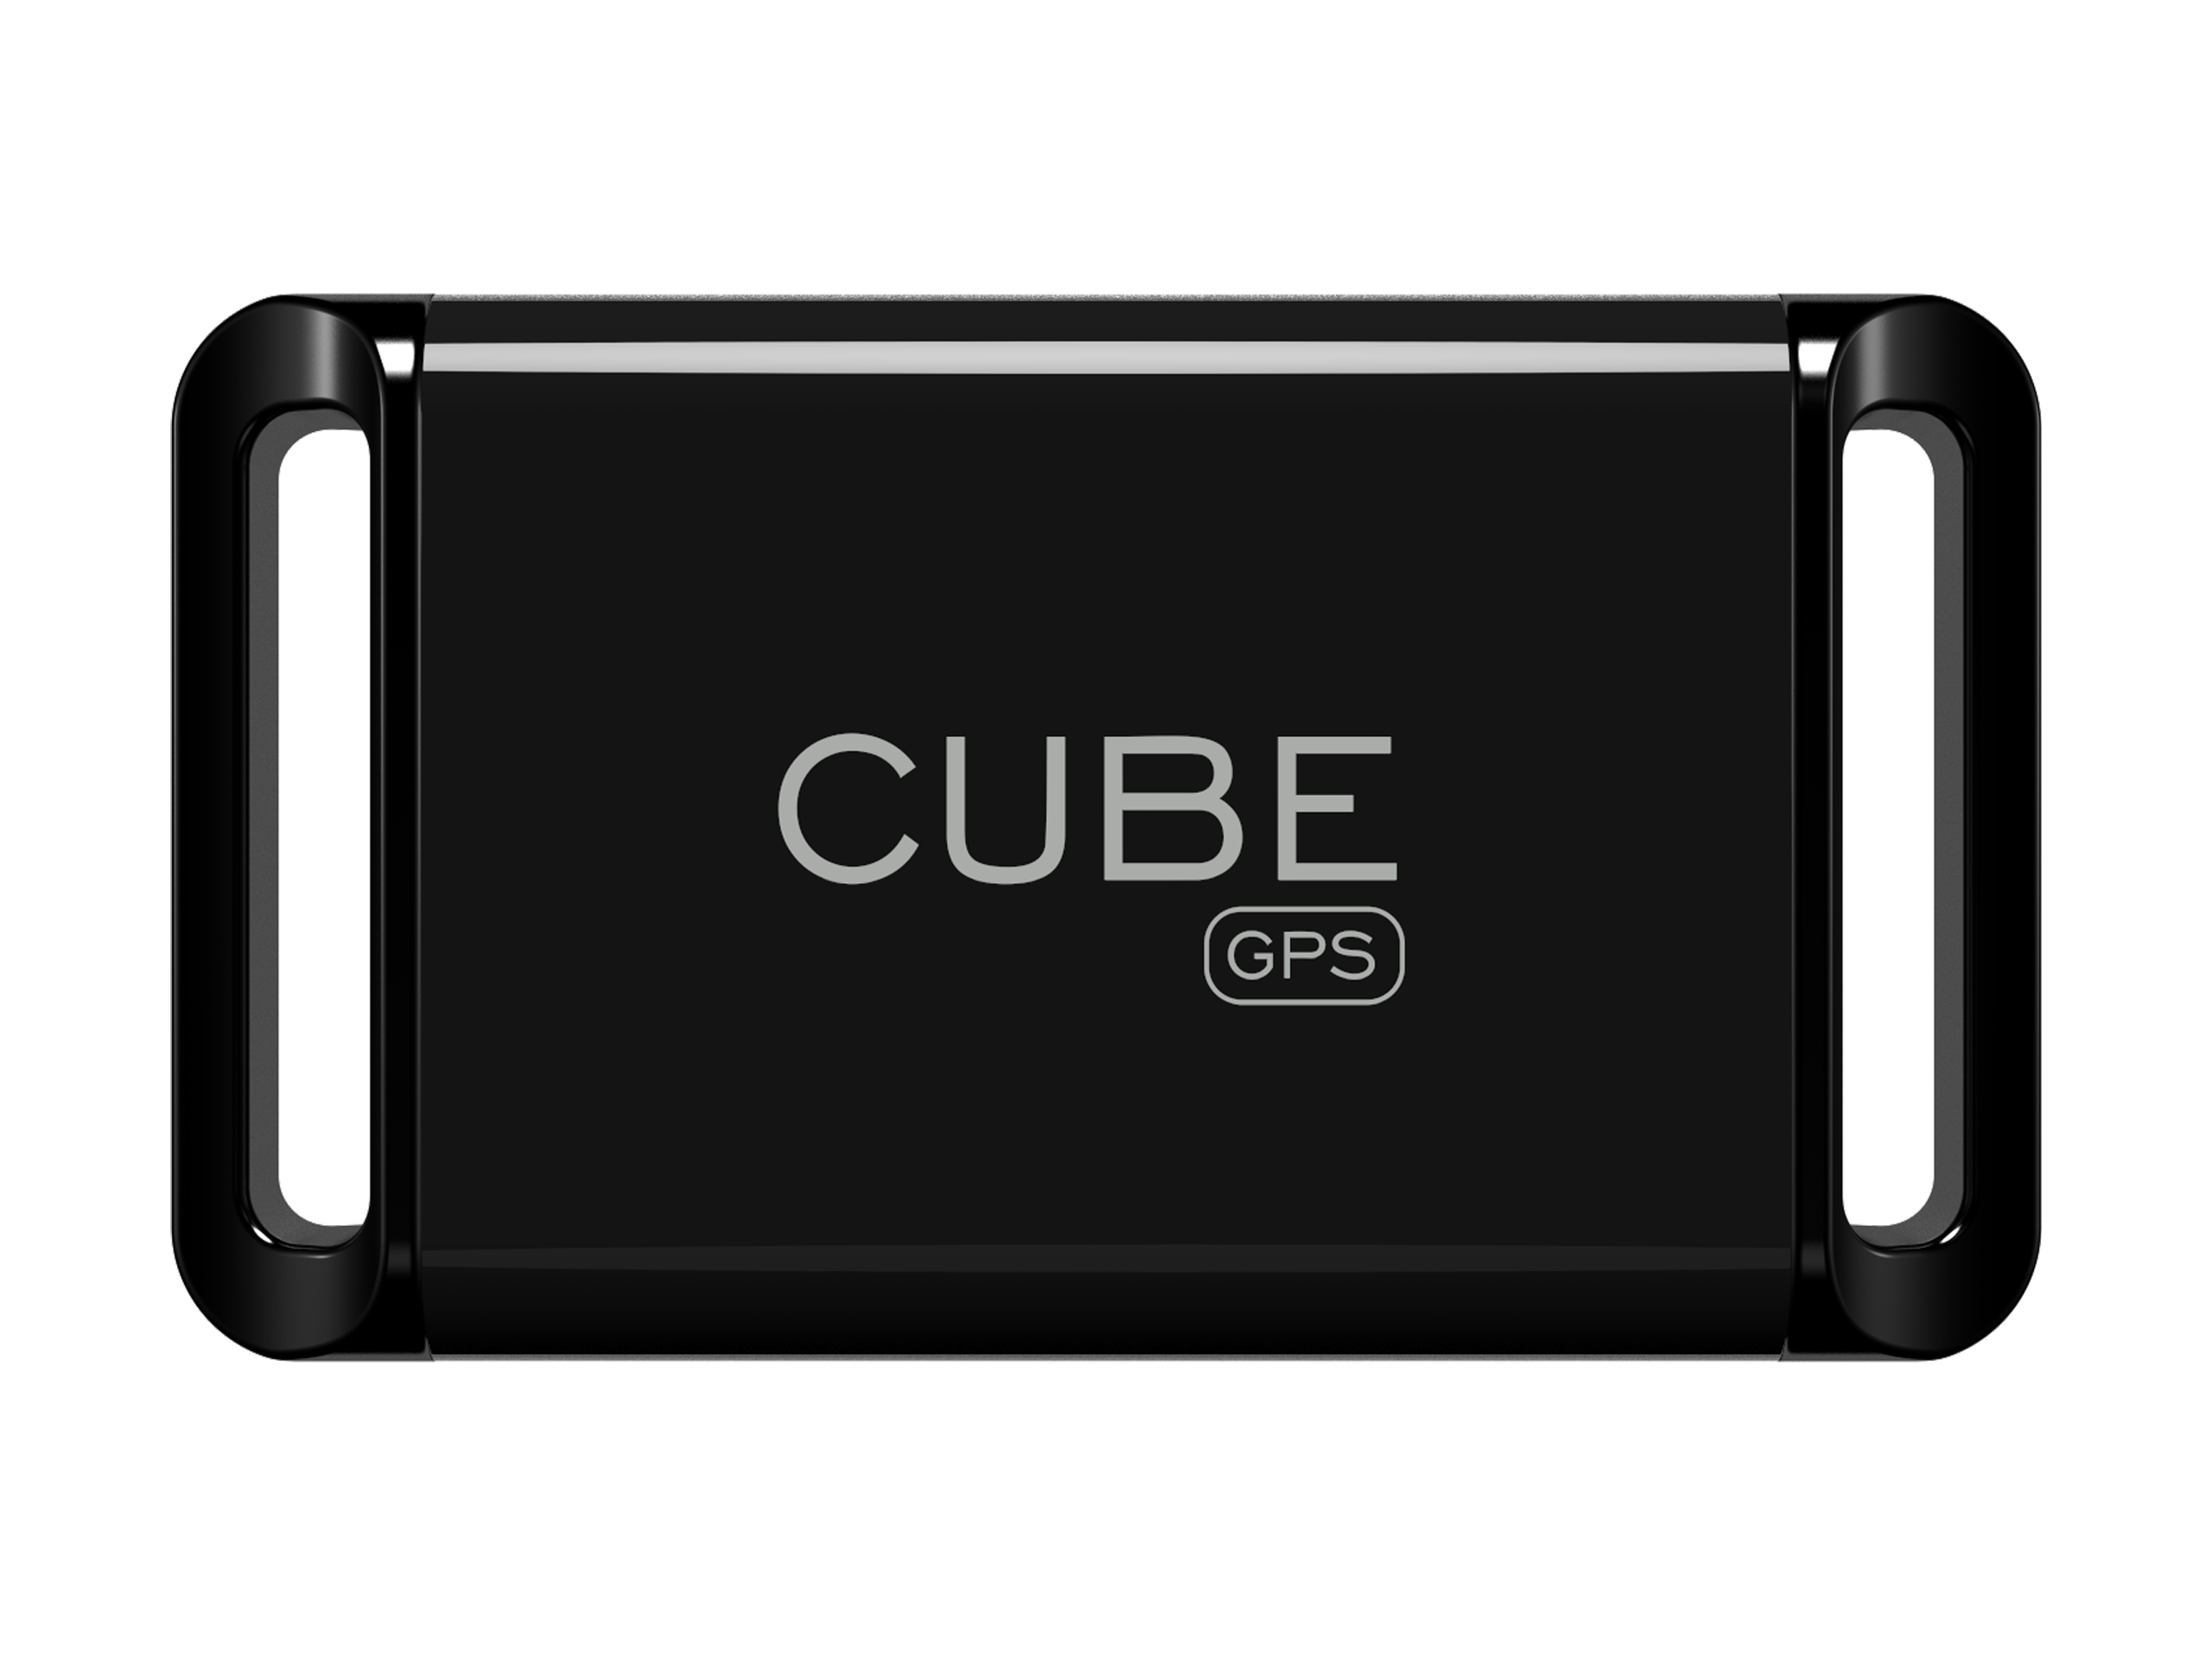 Cube Tracker | Find your Dog, Car, or Kids with Cube GPS